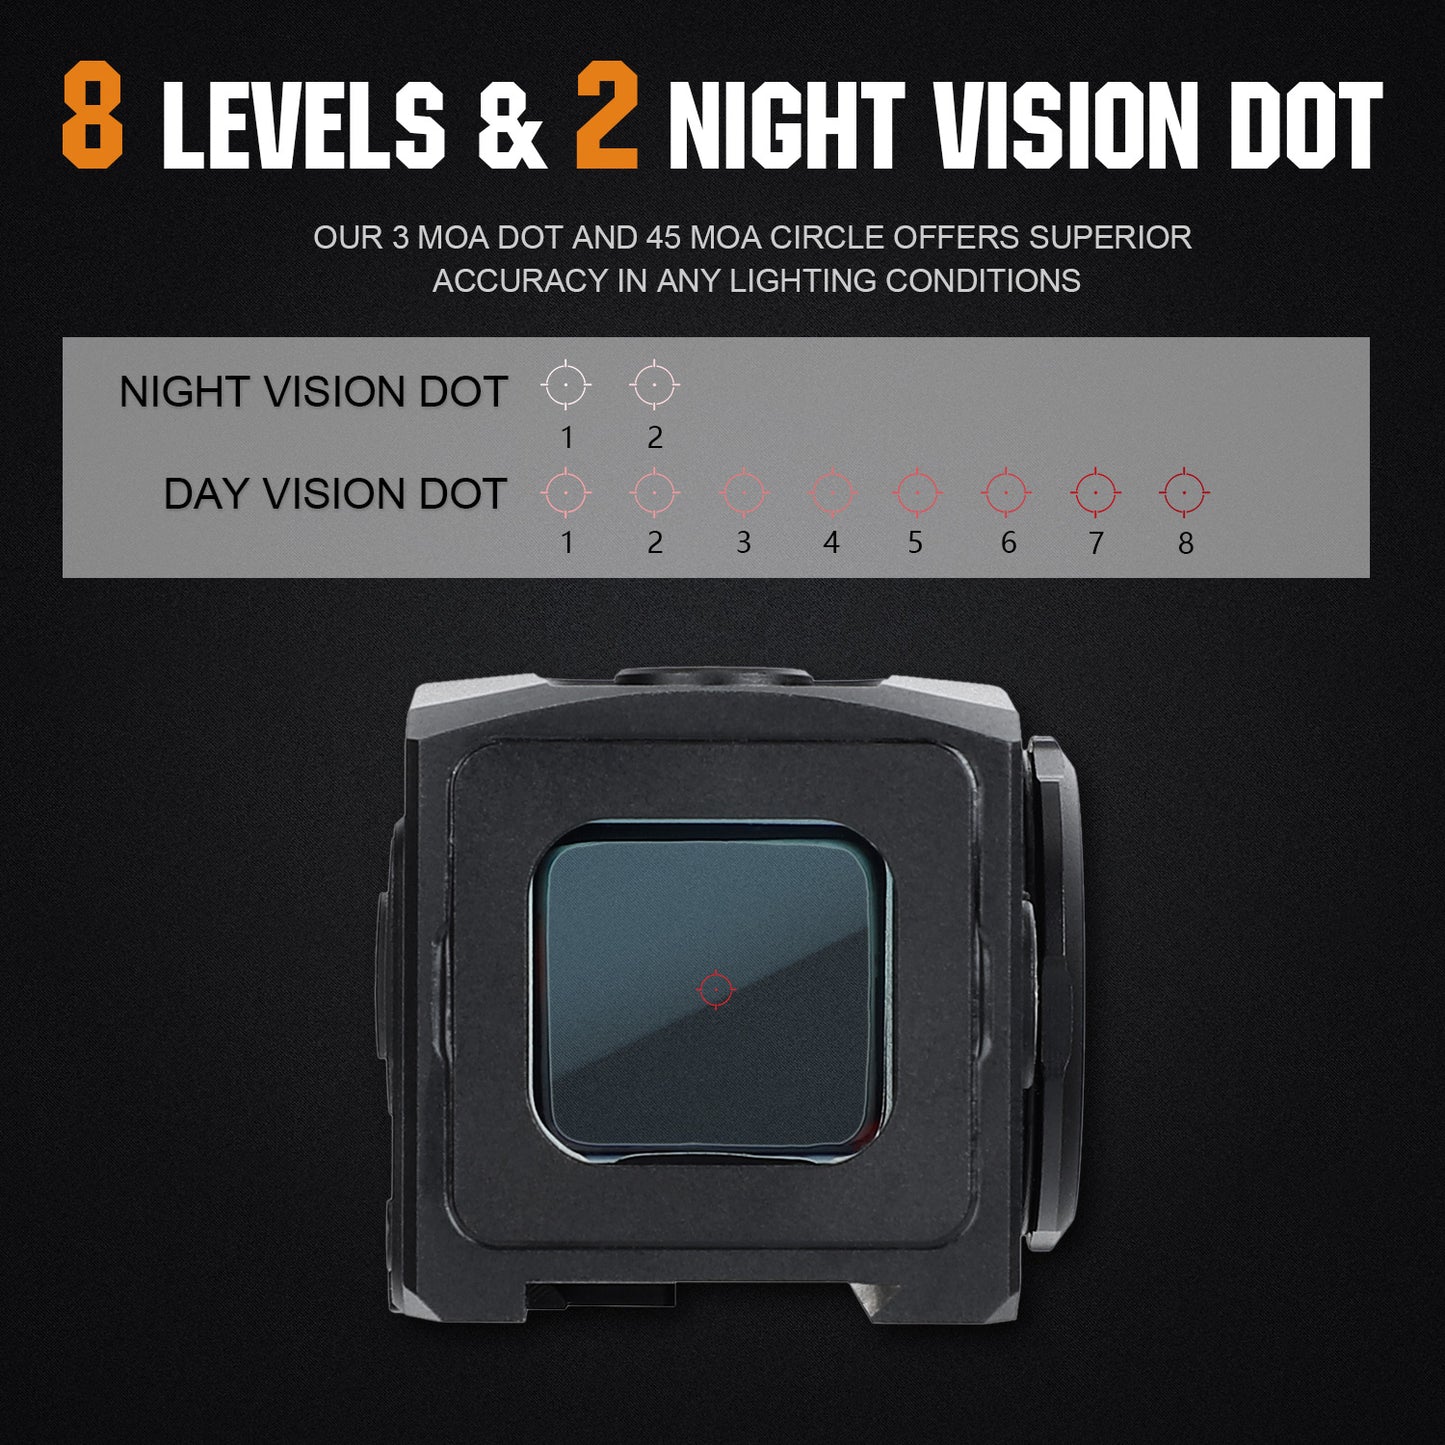 ohhunt FB O4 Motion Awake Red Dot Sight with Solar Power Multiple Reticle & 2 Adapter Plates for RMR Doctor